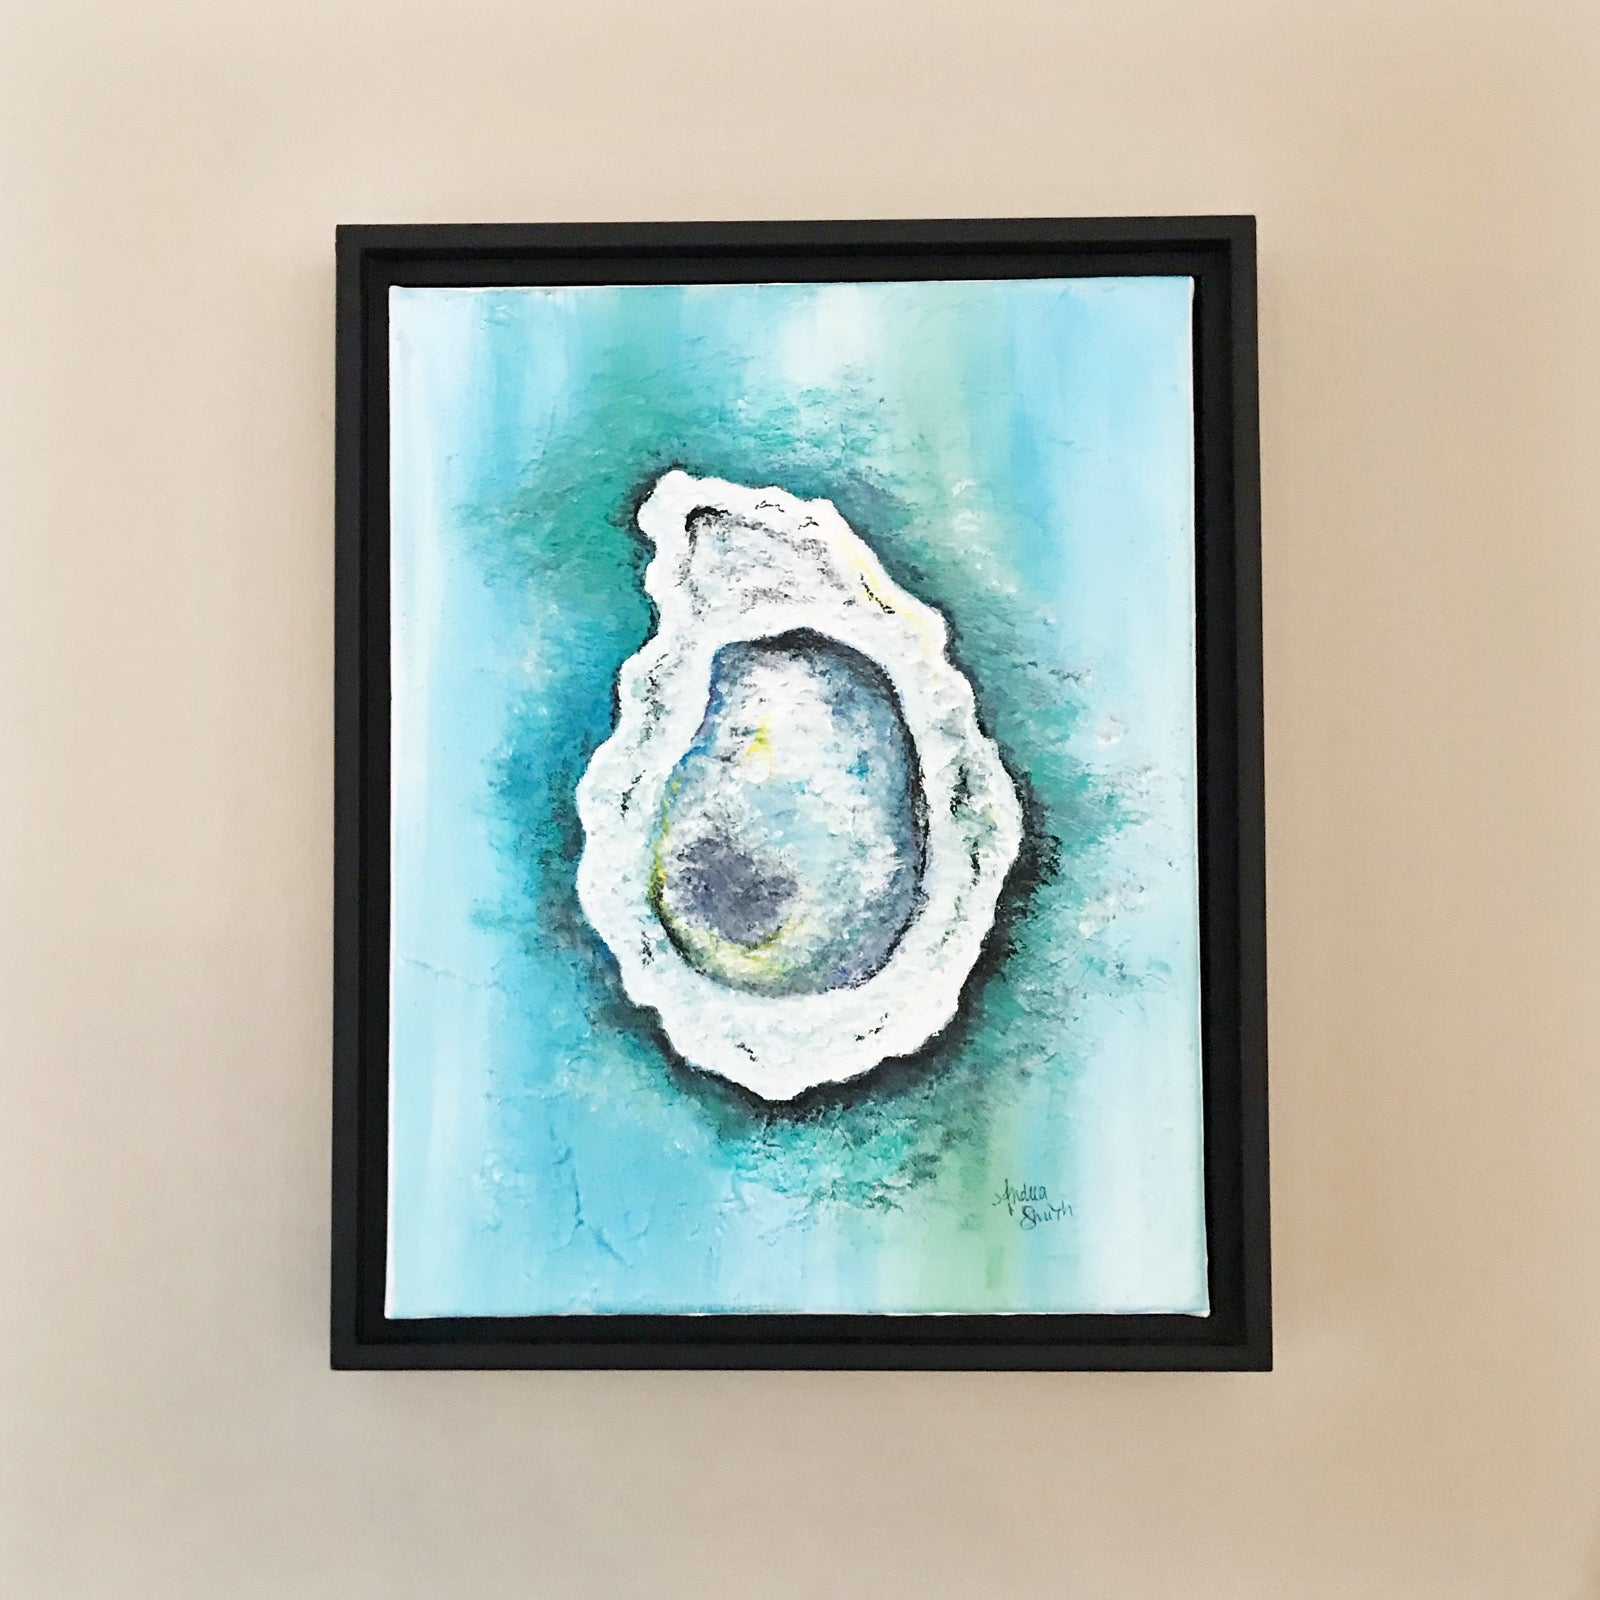 Blue Oyster, Mixed Media Painting by Andrea Smith